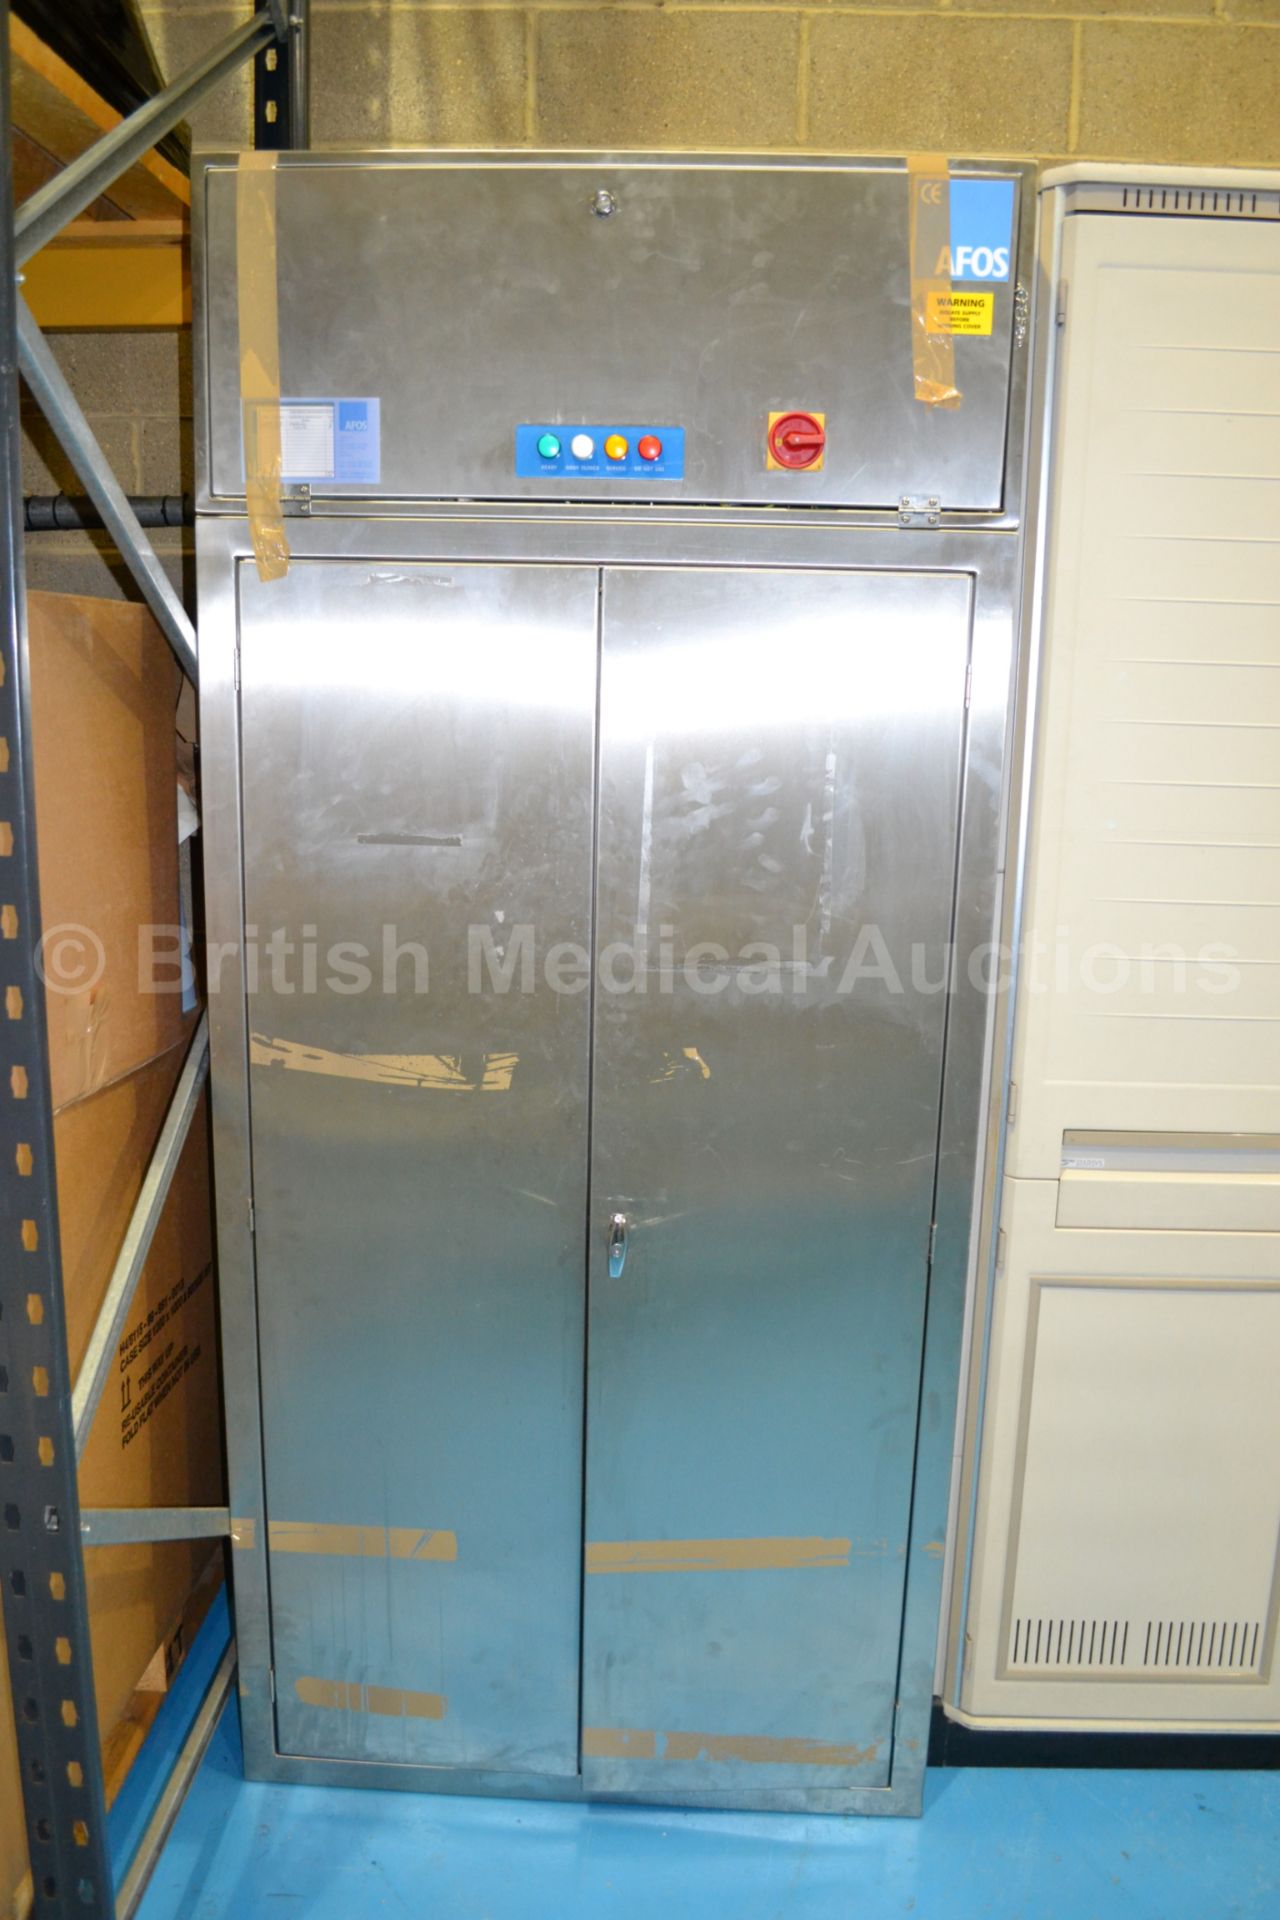 AFOS Endoscope Cabinet and Metro Starsys Endoscope - Image 2 of 3